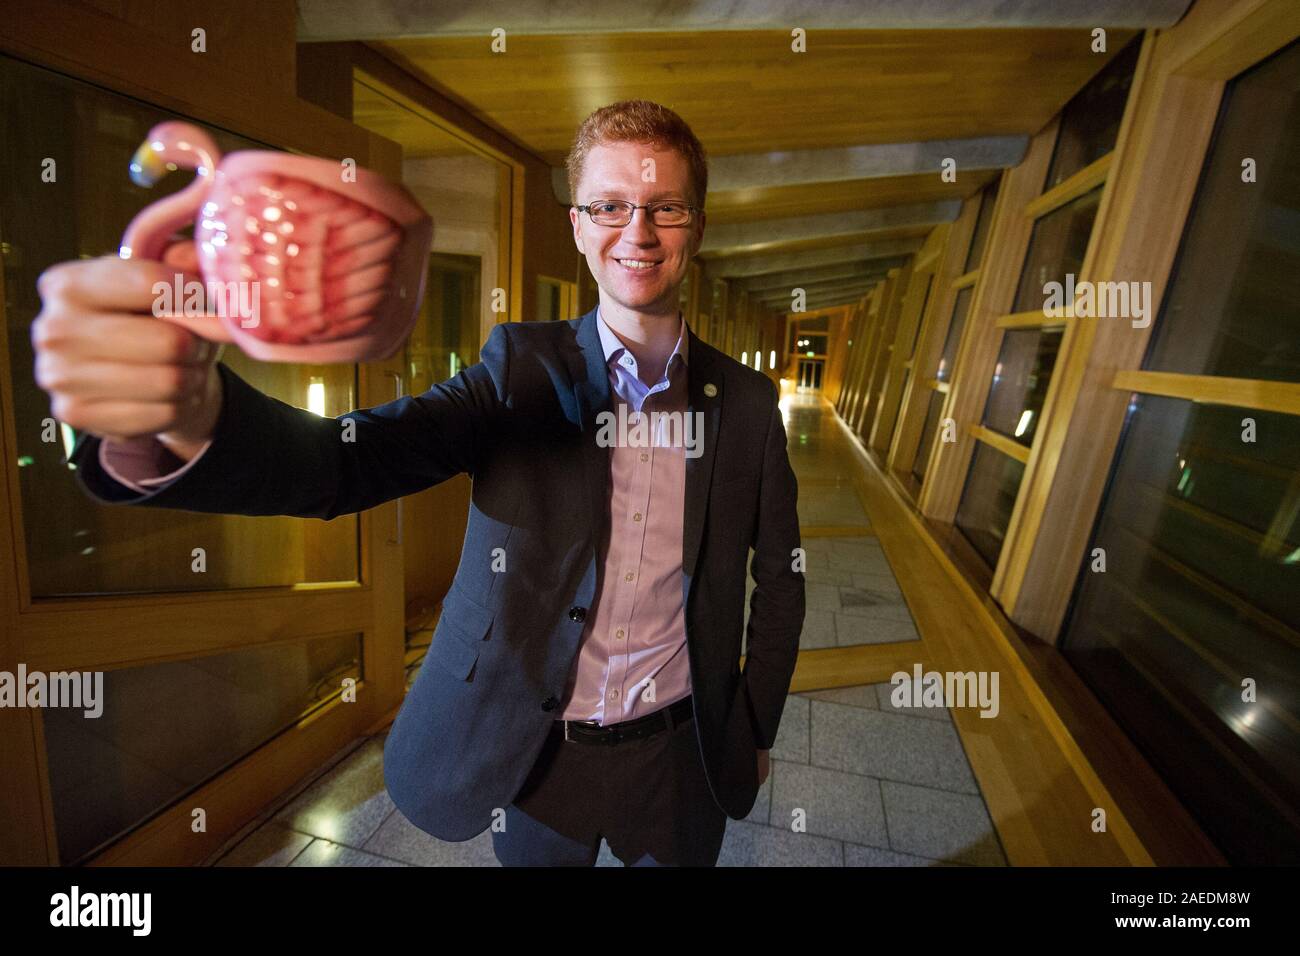 Edinburgh, UK. 7 November 2019. Pictured: Ross Greer MSP, Scottish green Party., holding a flamingo shaped mug of tea. The Scottish Green Party have halted the proposed development of Flamingo Land at Loch Lomond. Credit: Colin Fisher/Alamy Live news. Stock Photo